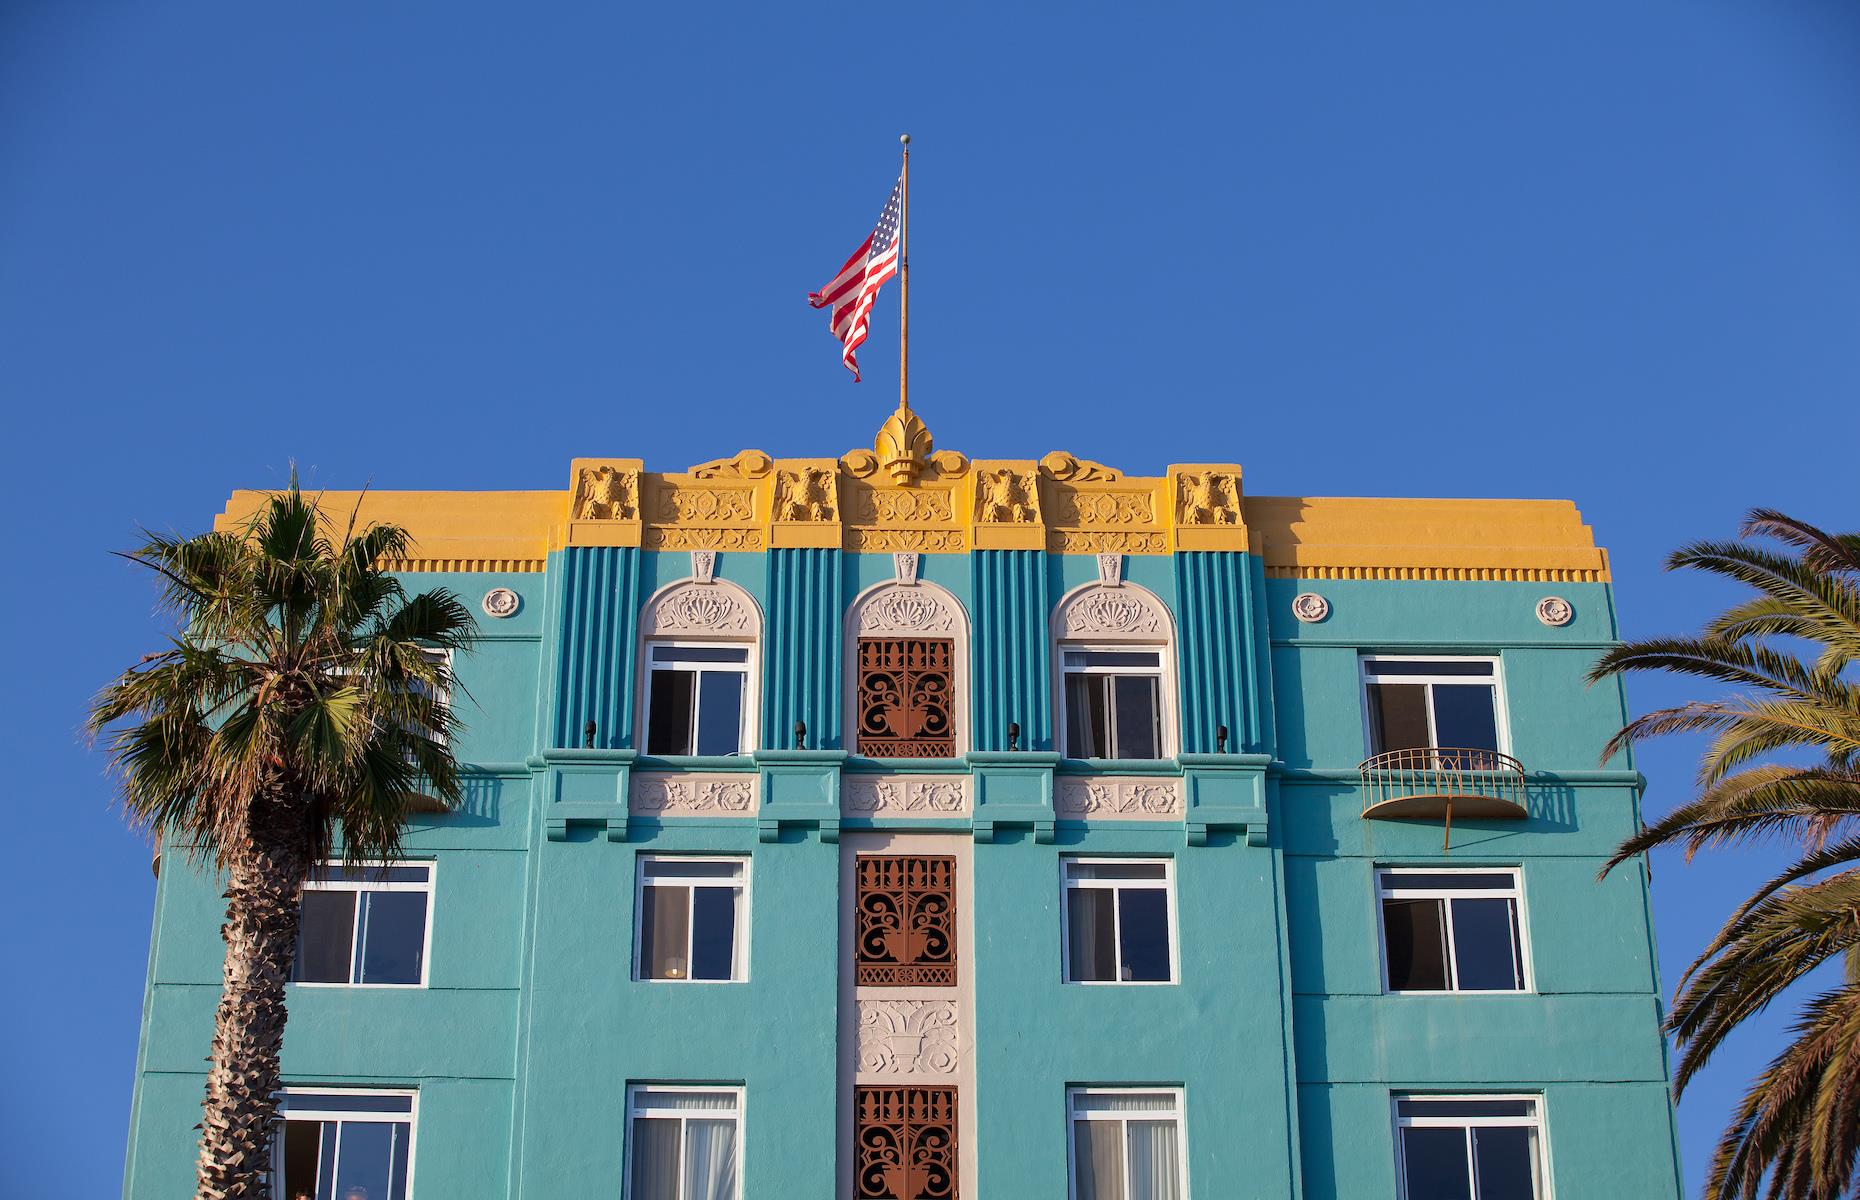 <p><a href="https://www.thegeorgian.com">The Georgian</a> has cut a striking figure on Santa Monica’s oceanside since 1933, when the neighborhood was a sleepy seaside community. Known as Santa Monica’s “First Lady”, the hotel was the vision of Rosamond Borde, a hotelier who commissioned architect M Eugene Durfee to design a grand hotel to attract an affluent crowd. His bold design drew on both the Romanesque Revival and fashionable Art Deco movements. The Georgian was later an exclusive and illicit hangout as one of Los Angeles's first speakeasies. Its star appeal faded in the subsequent decades, but a recent restoration has seen the pastel-hued beauty restored to its former chichi self.</p>